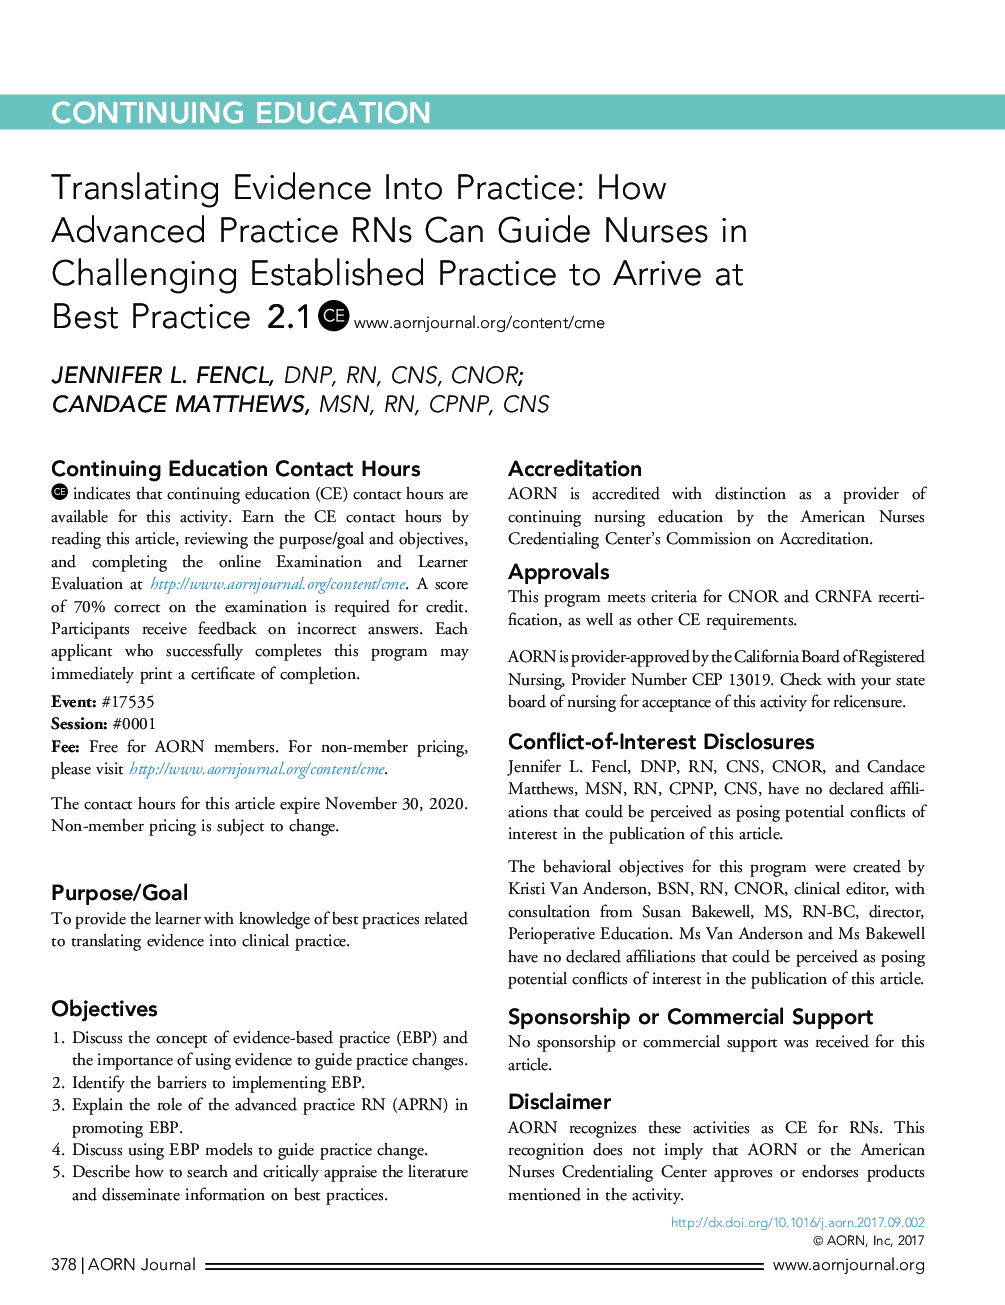 Translating Evidence Into Practice: How Advanced Practice RNs Can Guide Nurses in Challenging Established Practice to Arrive at BestÂ Practice